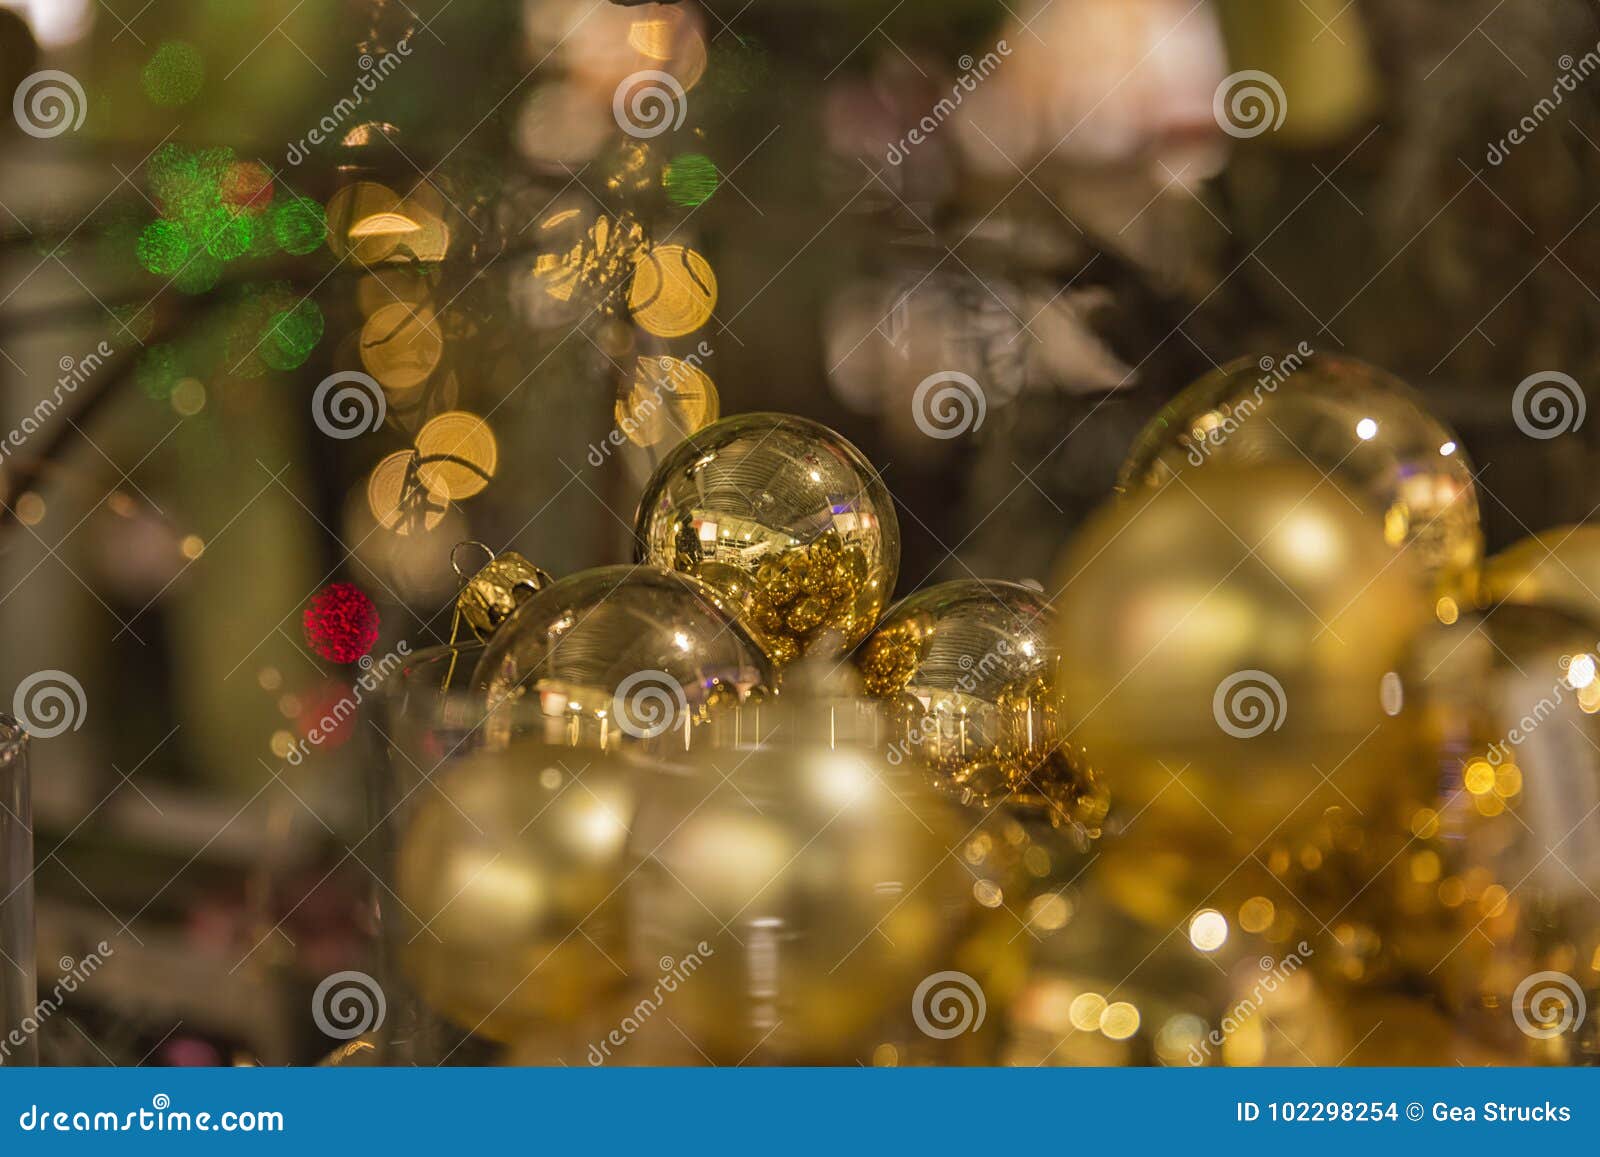 Golden Christmas Balls Hanging in a Tree Stock Photo - Image of ...